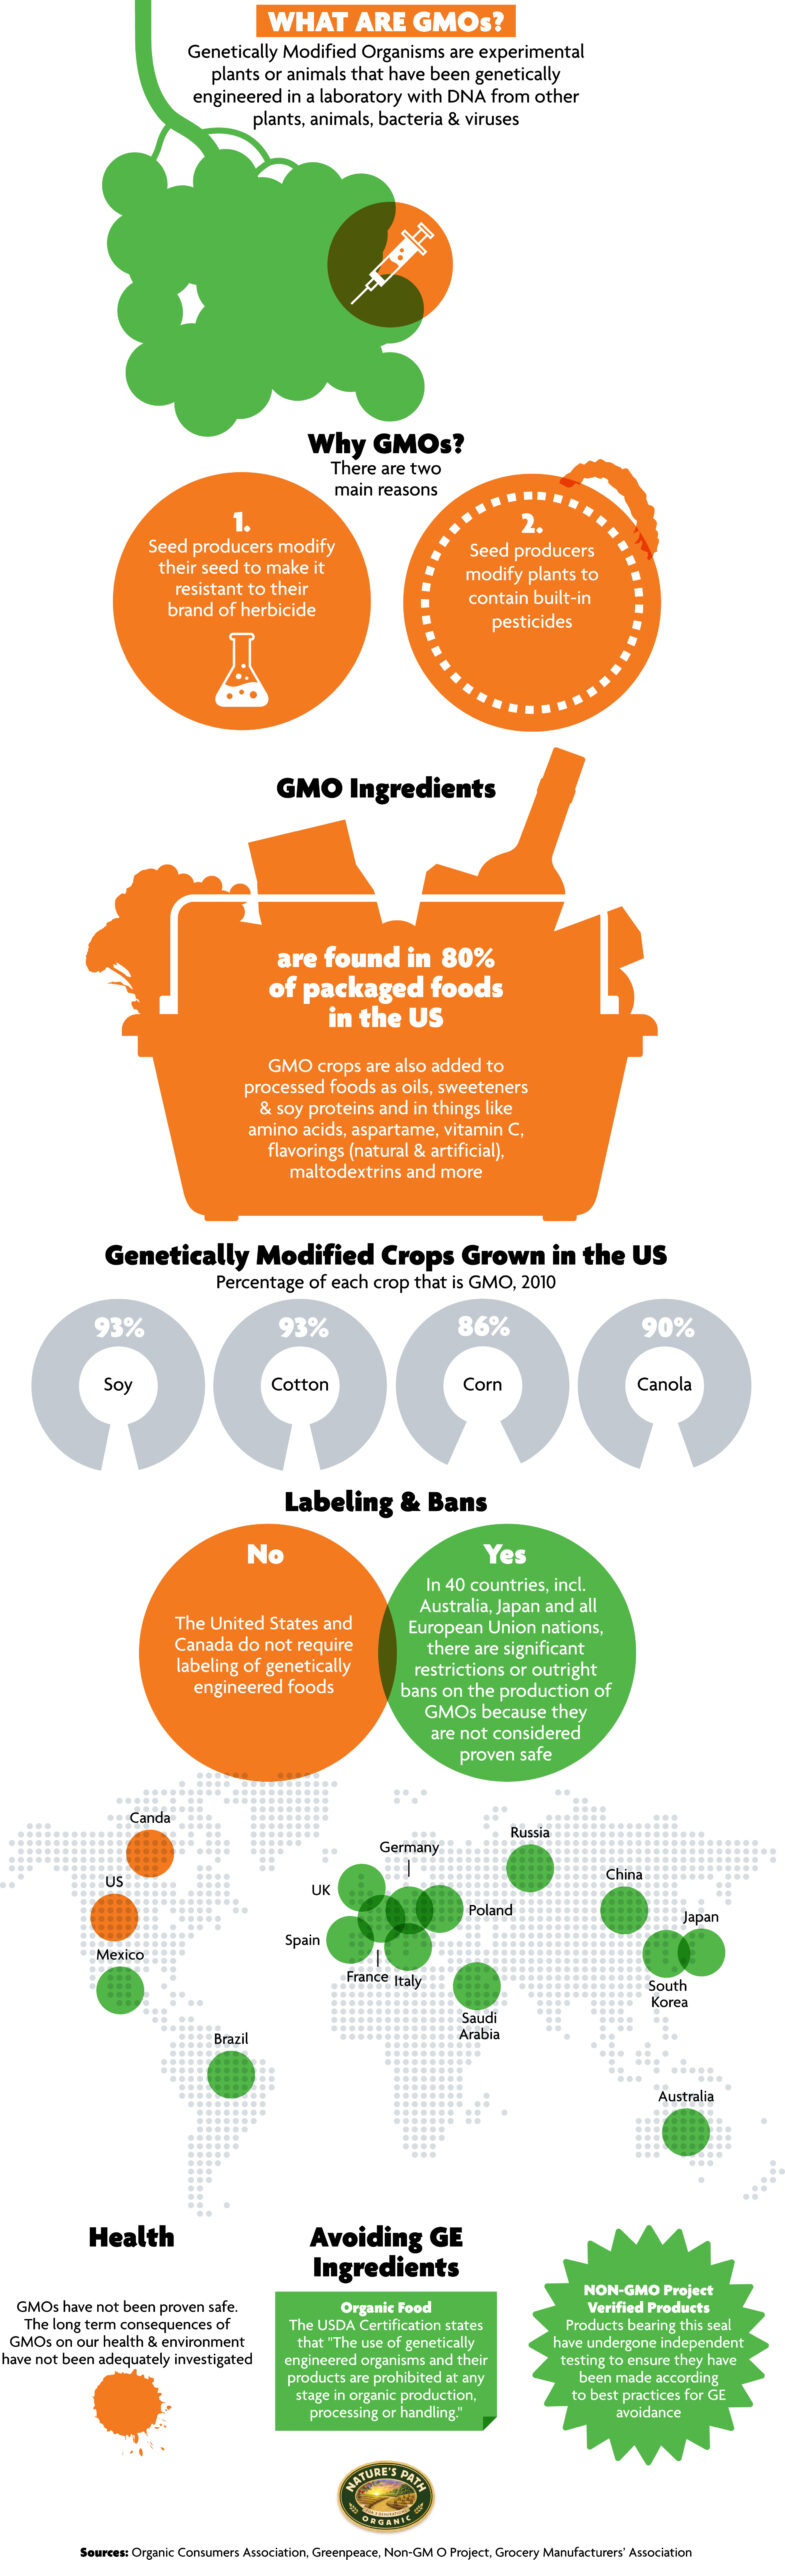 b"Infographic: GMO crops wreck the environment, human health? Latest evidence says otherwise ..."